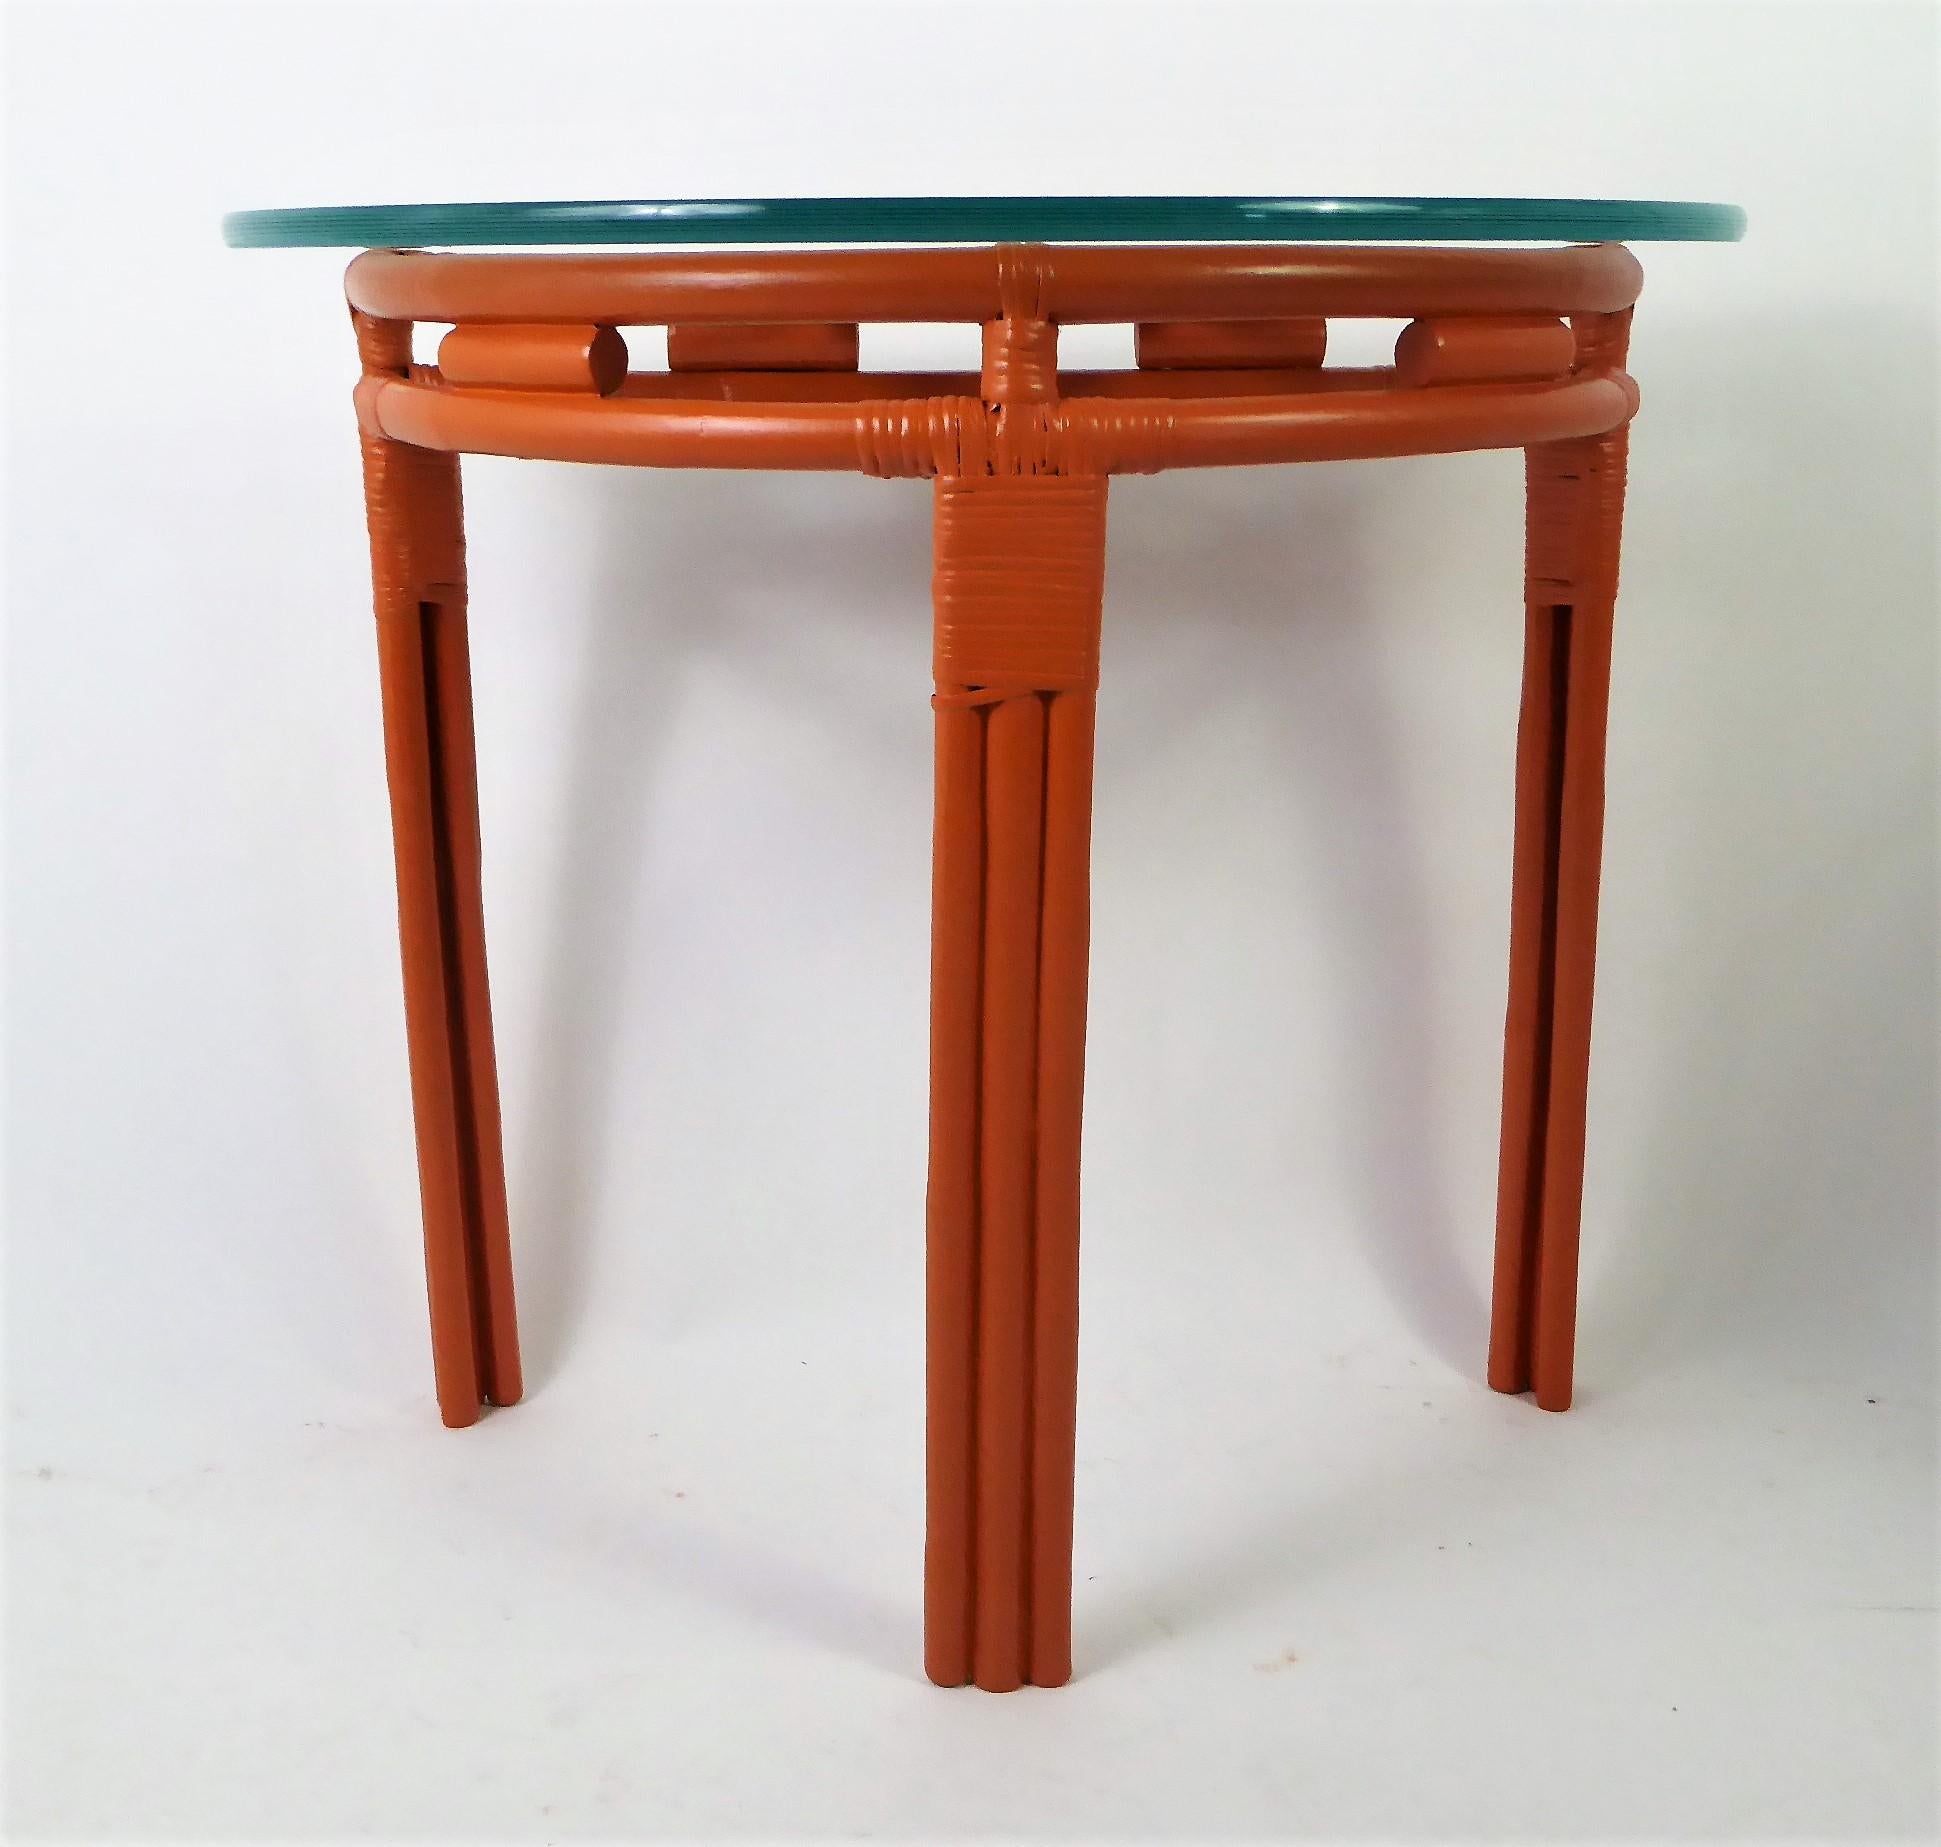 1940s Painted Rattan Demilune Glass Top Consoles in Hermes Orange 6